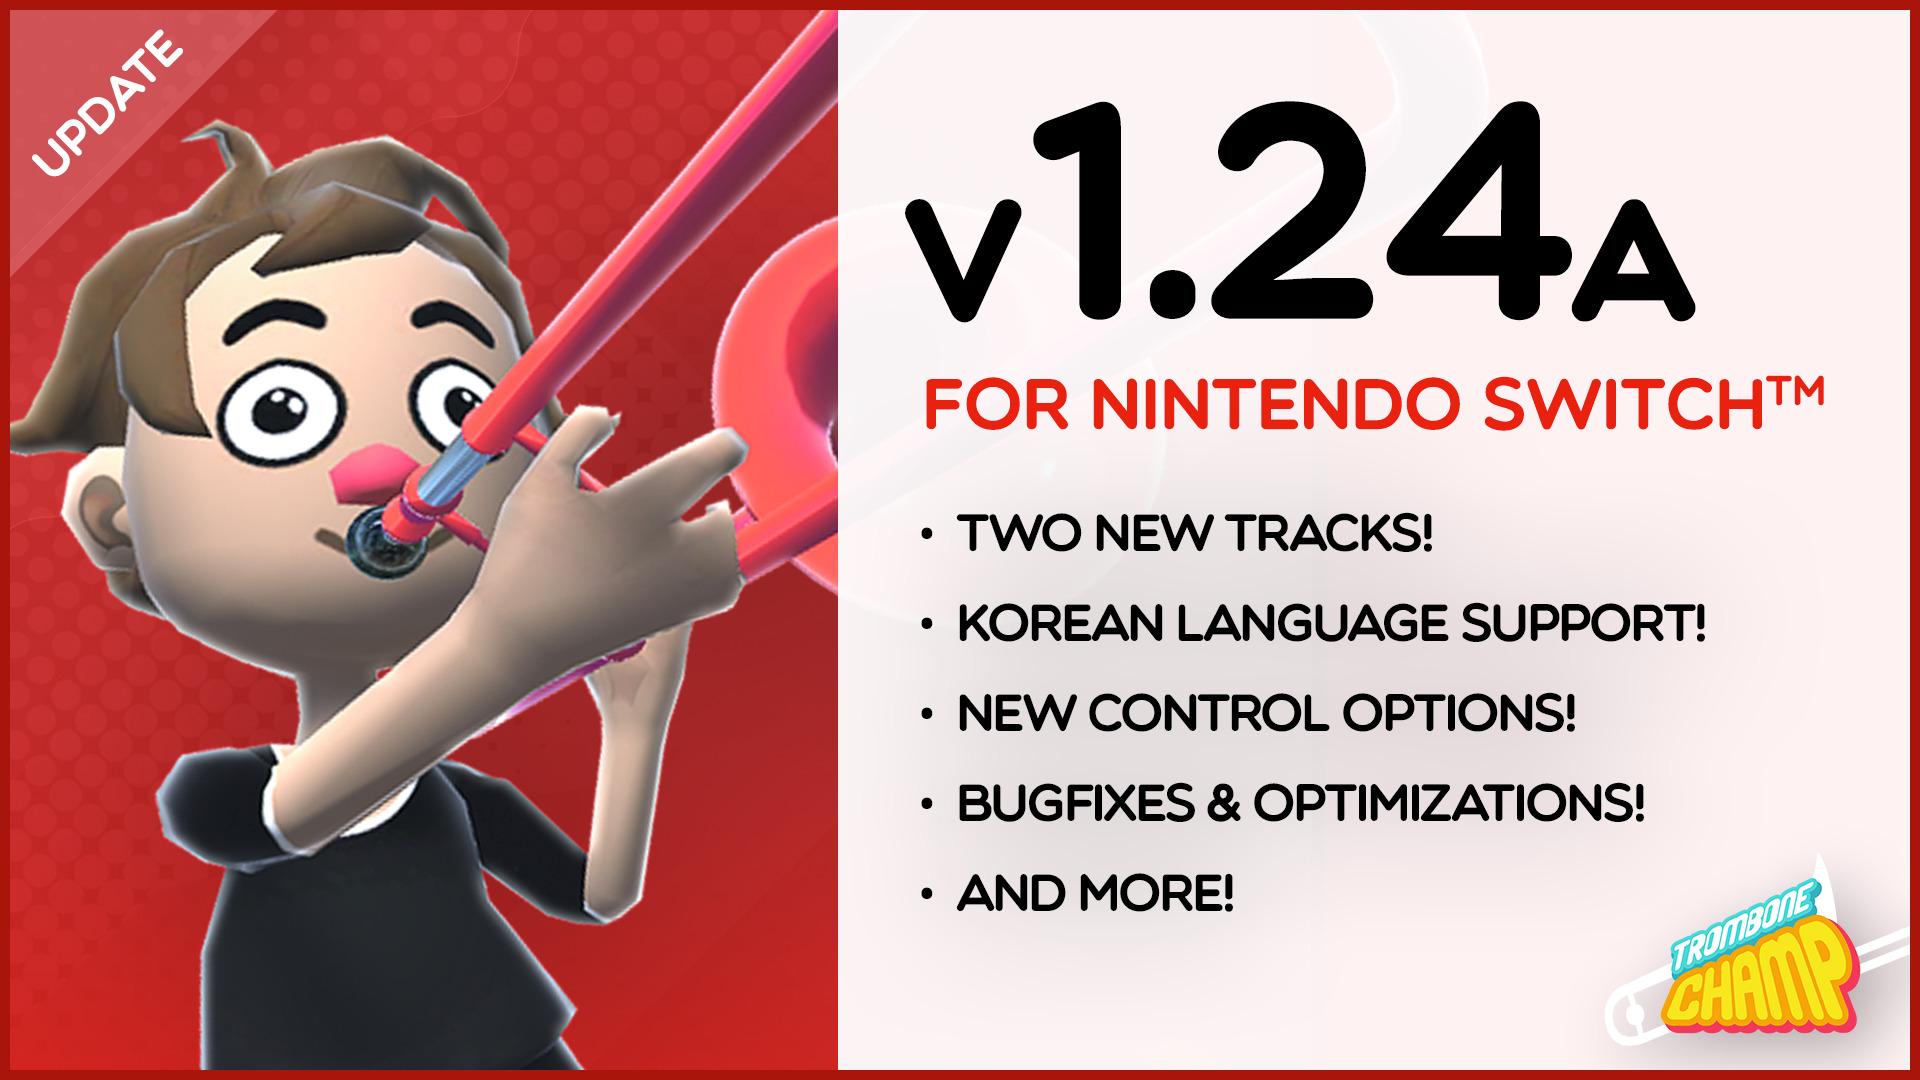 Trombone Champ Version 1.24A comes to the Nintendo Switch™!